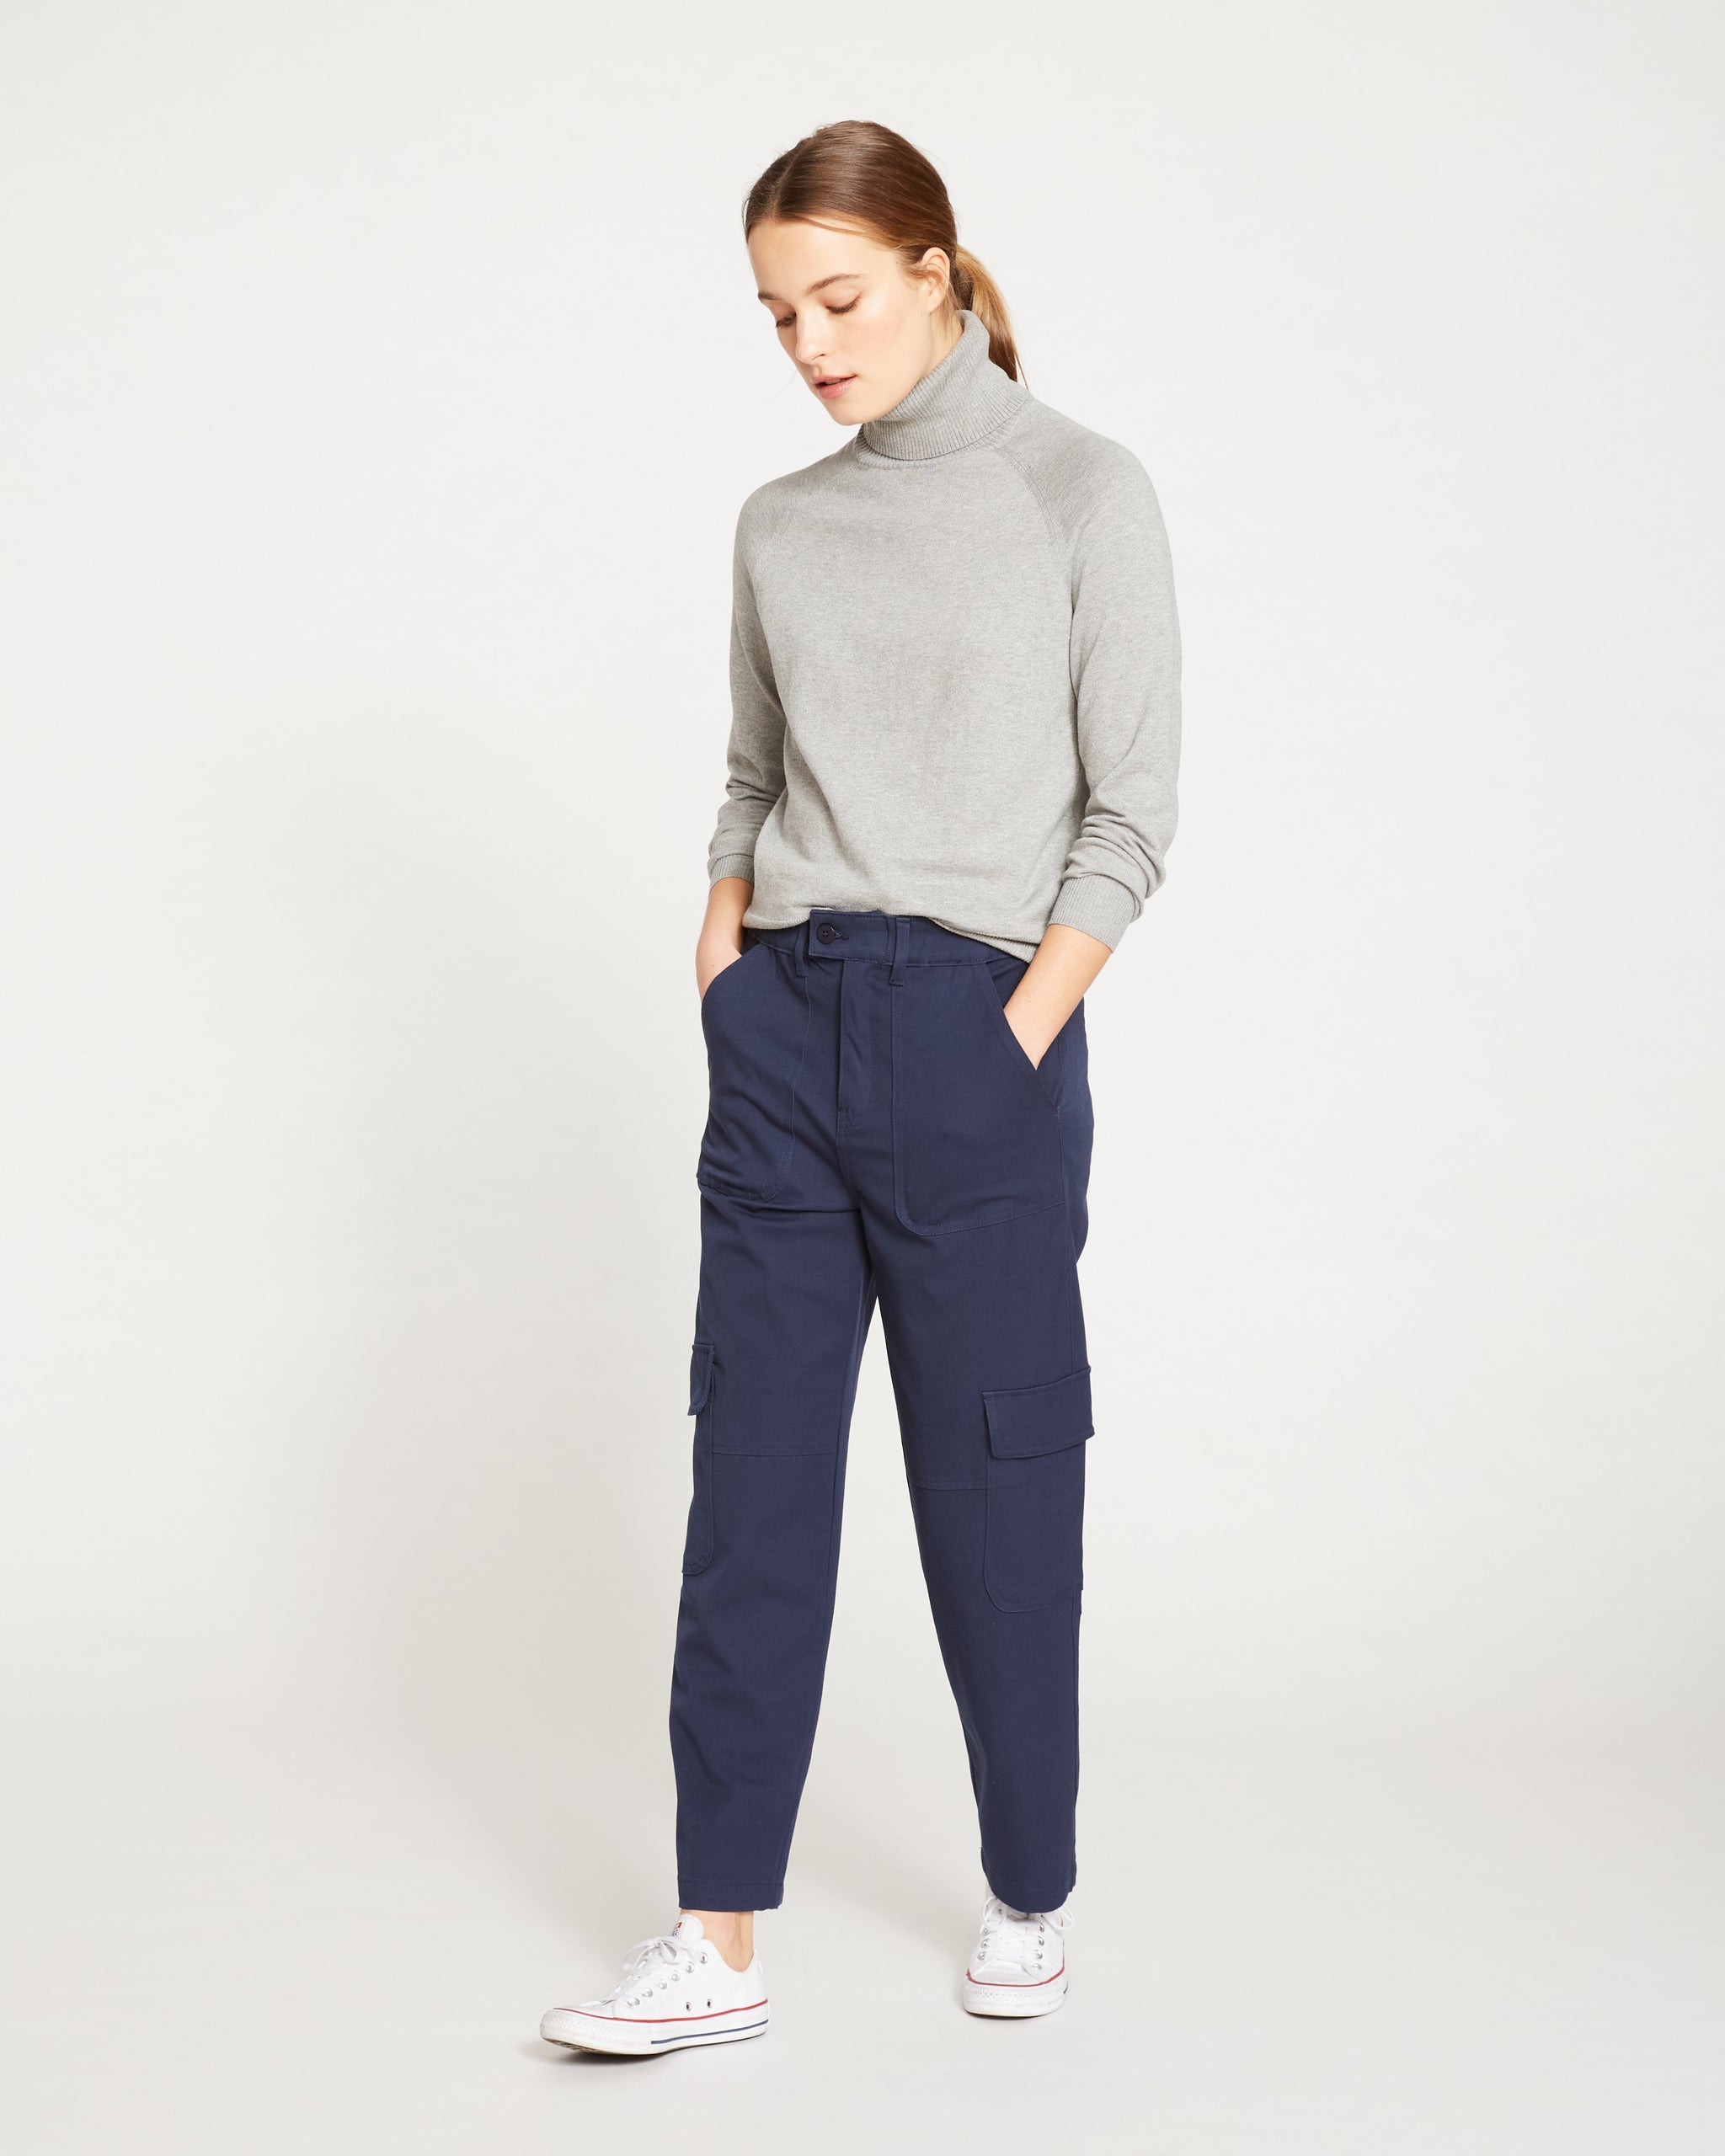 Ladies Flat Front Poly/Cotton Cargo Work Pants in Navy Blue - Available in  a Full Range of Female Sizes from 0 - 28W - Item # 750-8573